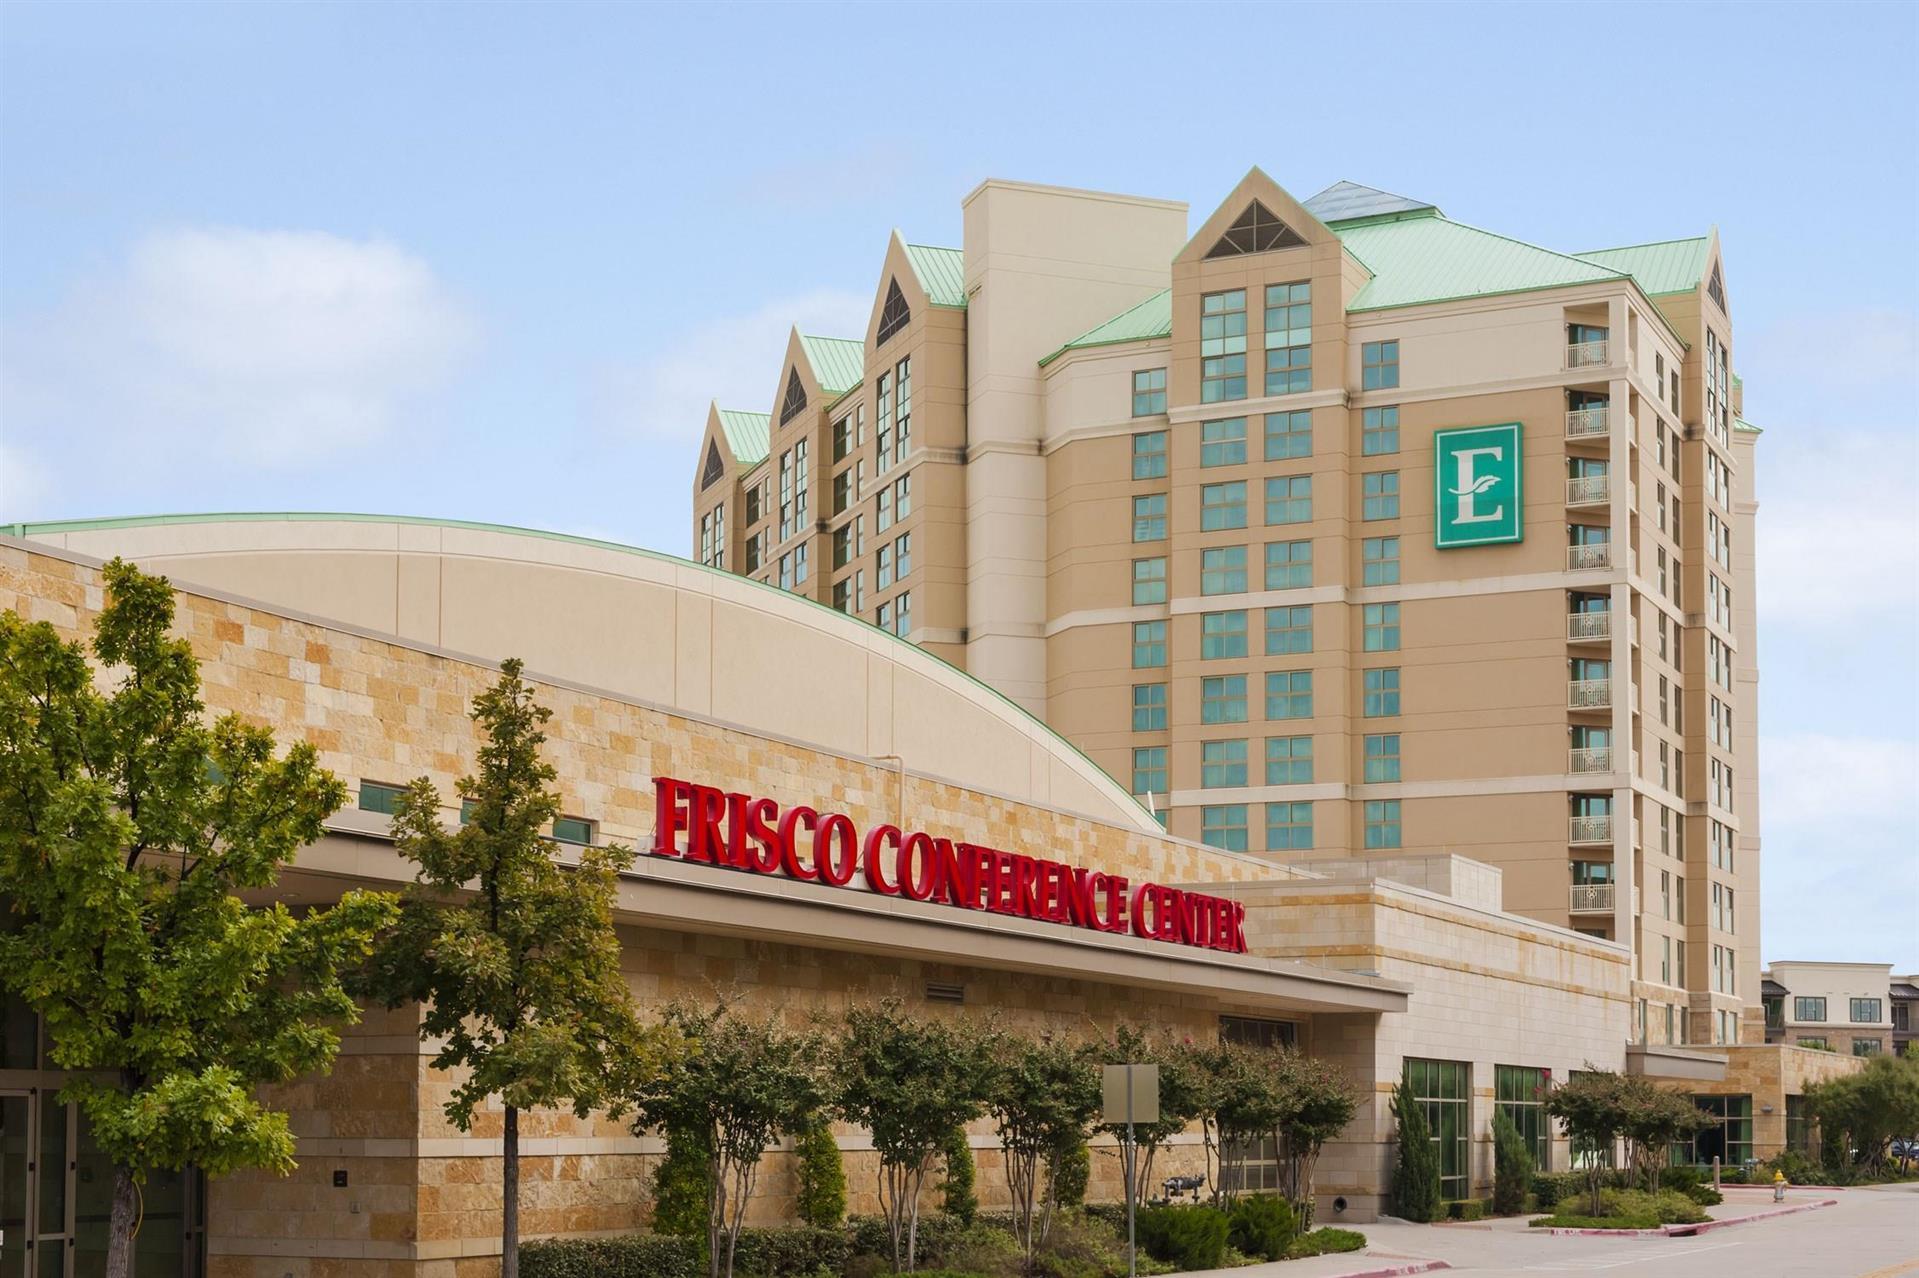 Embassy Suites by Hilton Dallas Frisco Hotel & Convention Center in Frisco, TX